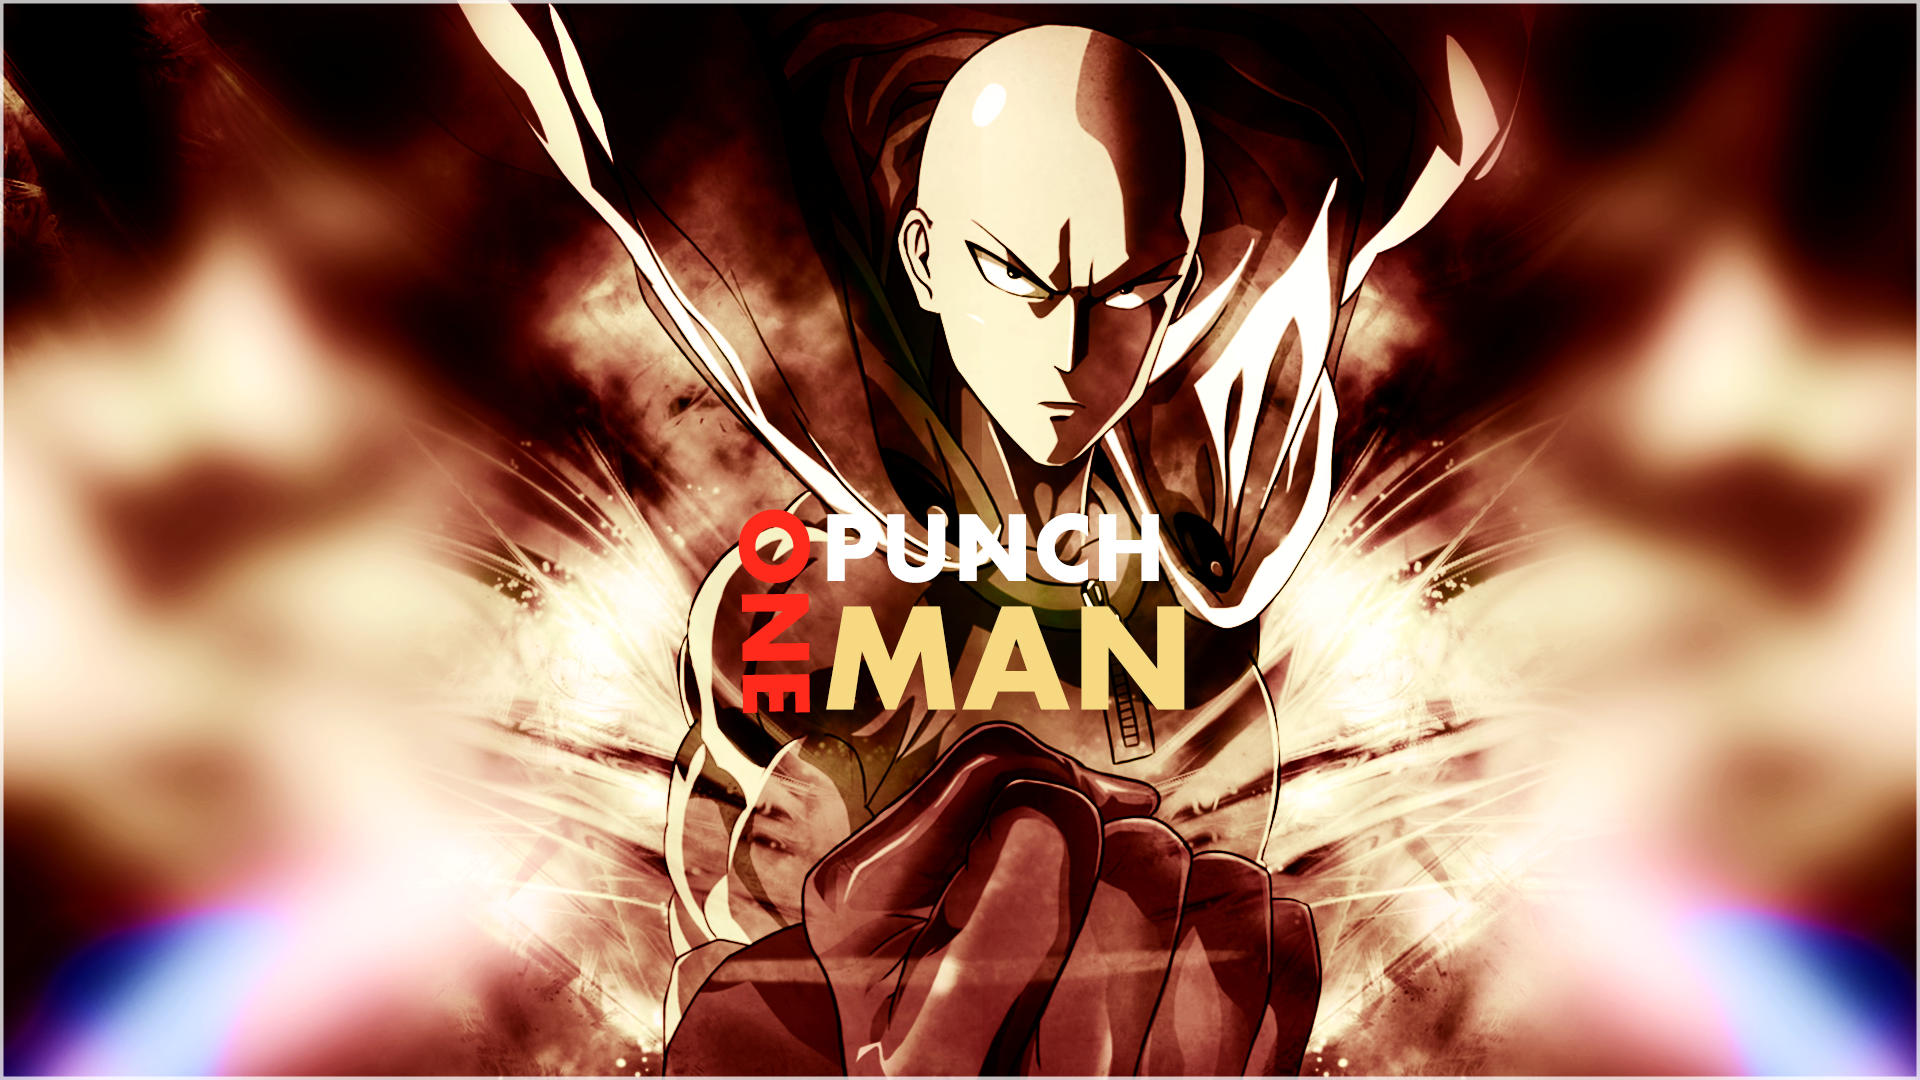 One Punch Man Wallpaper In HD The Tech Tactics